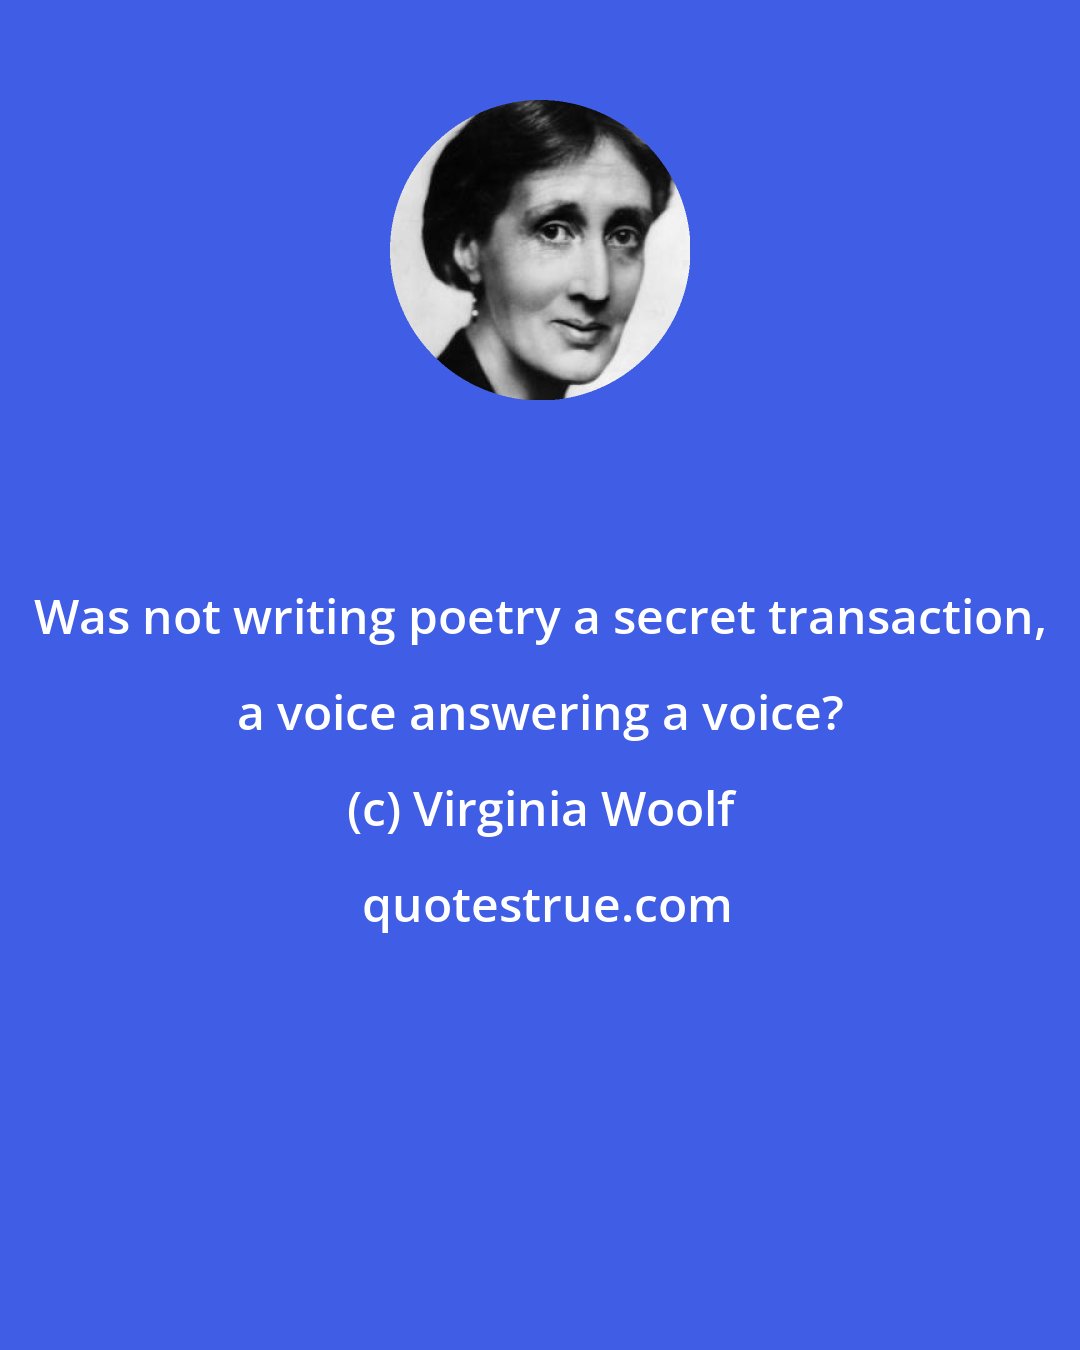 Virginia Woolf: Was not writing poetry a secret transaction, a voice answering a voice?